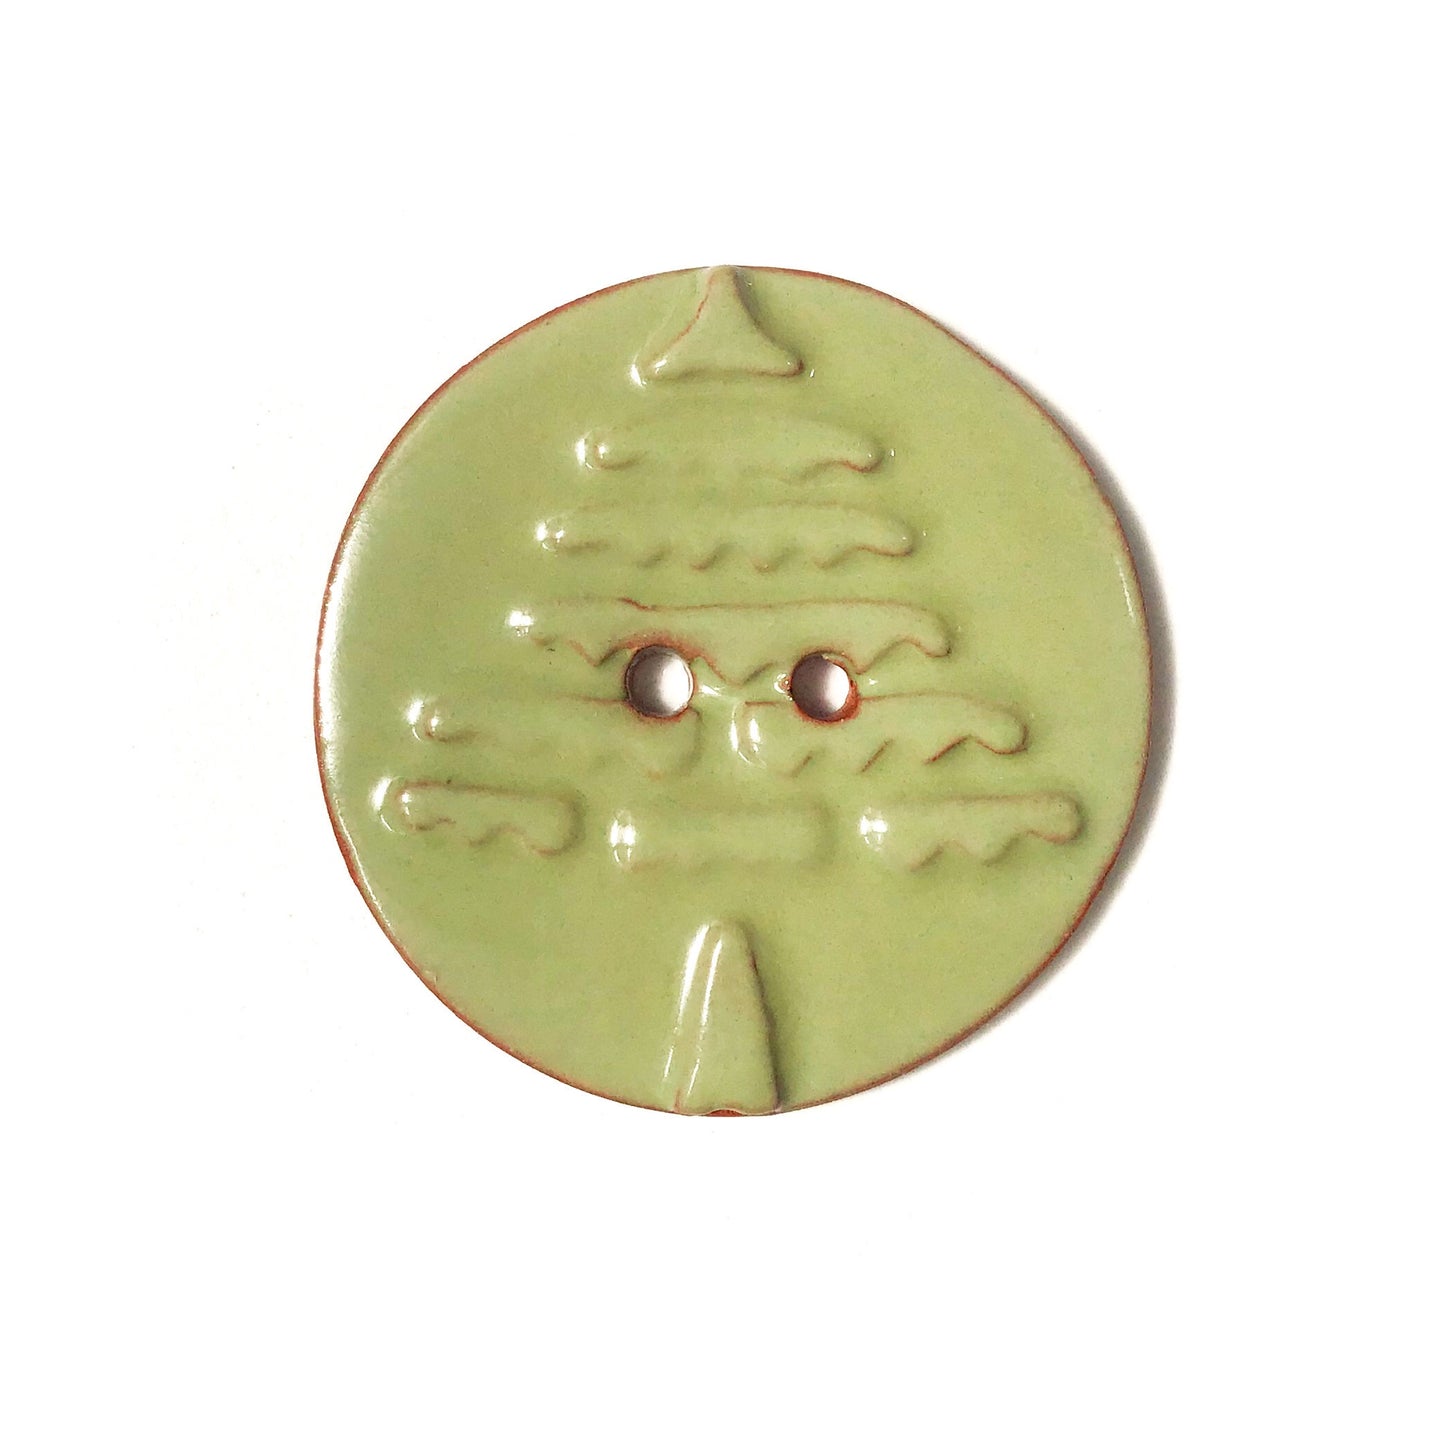 Mirro Stamp Buttons on Red Clay - Warm Shade Ceramic Buttons - 1 3/8"